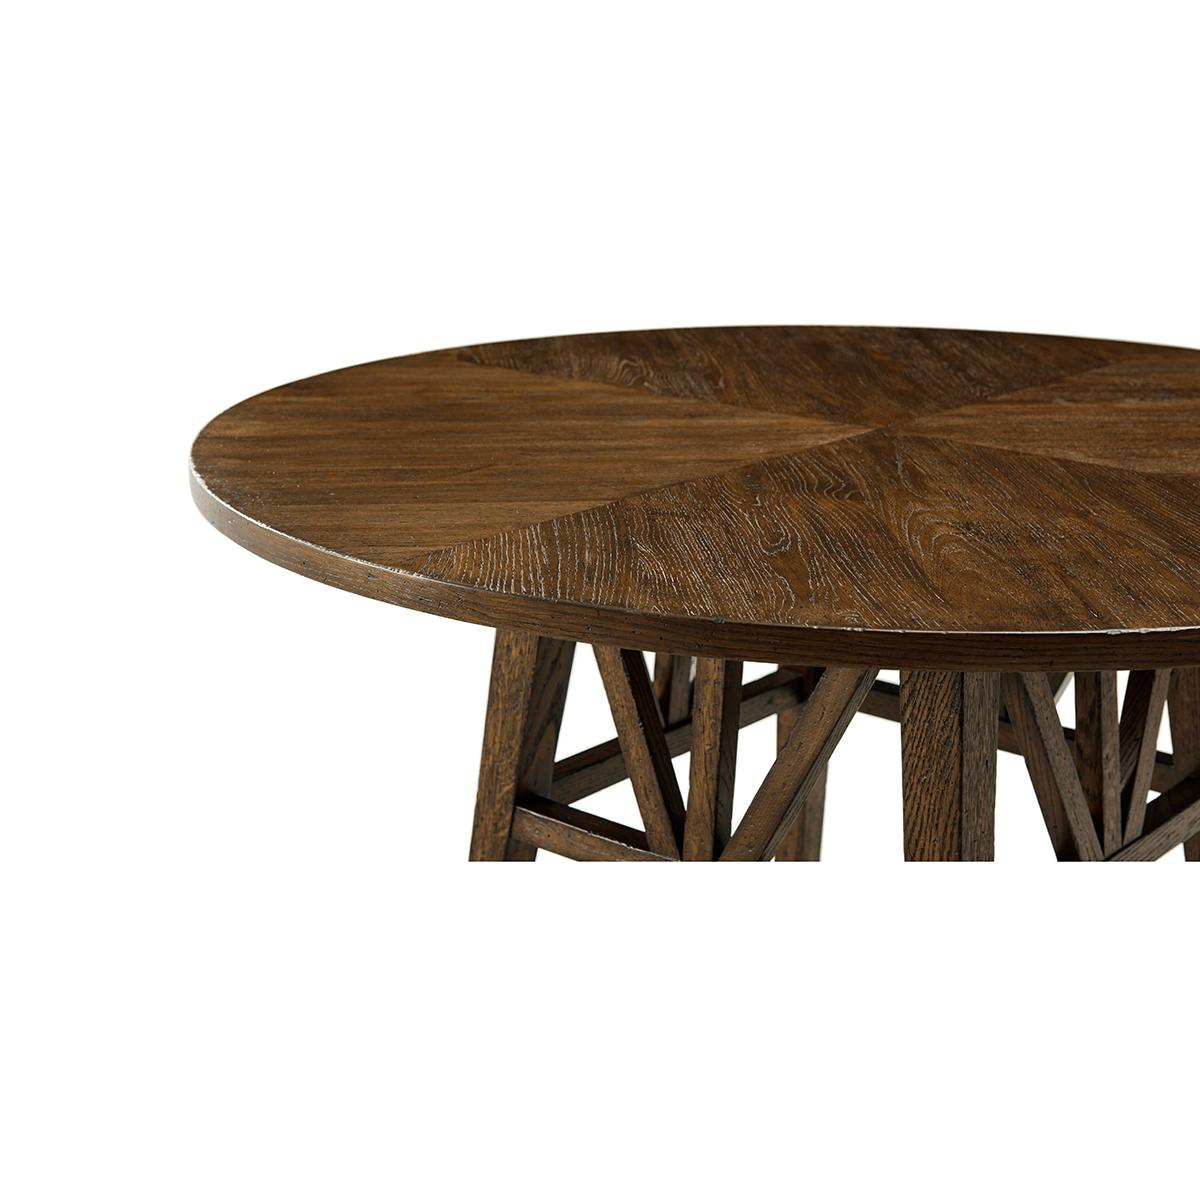 Contemporary Dark Rustic Oak Round Dining Table For Sale